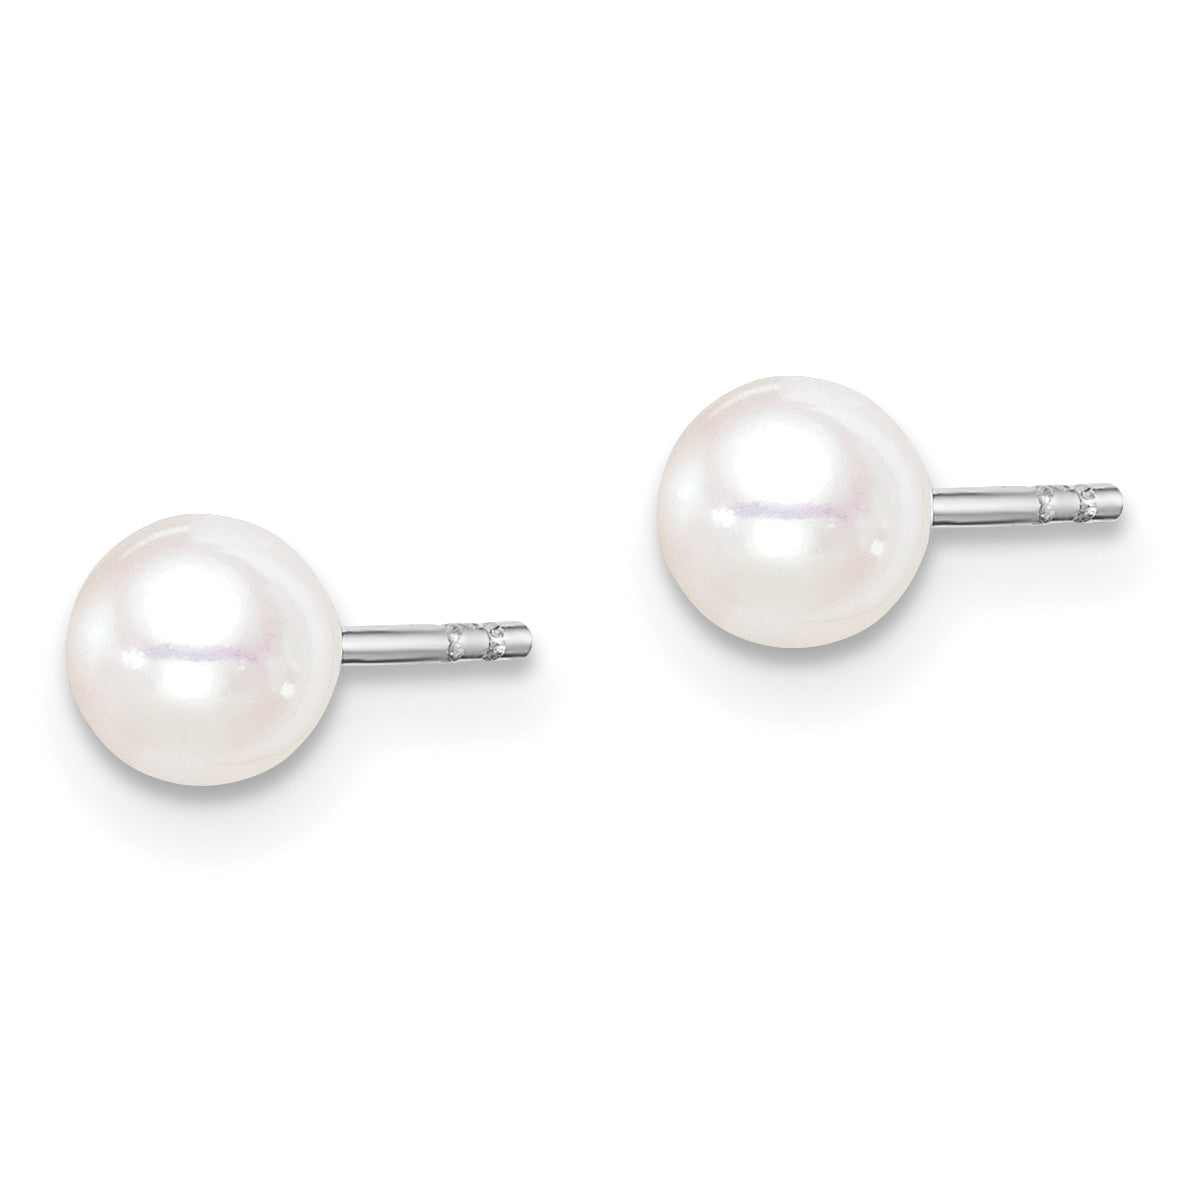 Sterling Silver Madi K Rhodium-plated Polished 4-5mm White, Pink and Purple Round Freshwater Cultured Pearl Pearl Stud Earrings Set